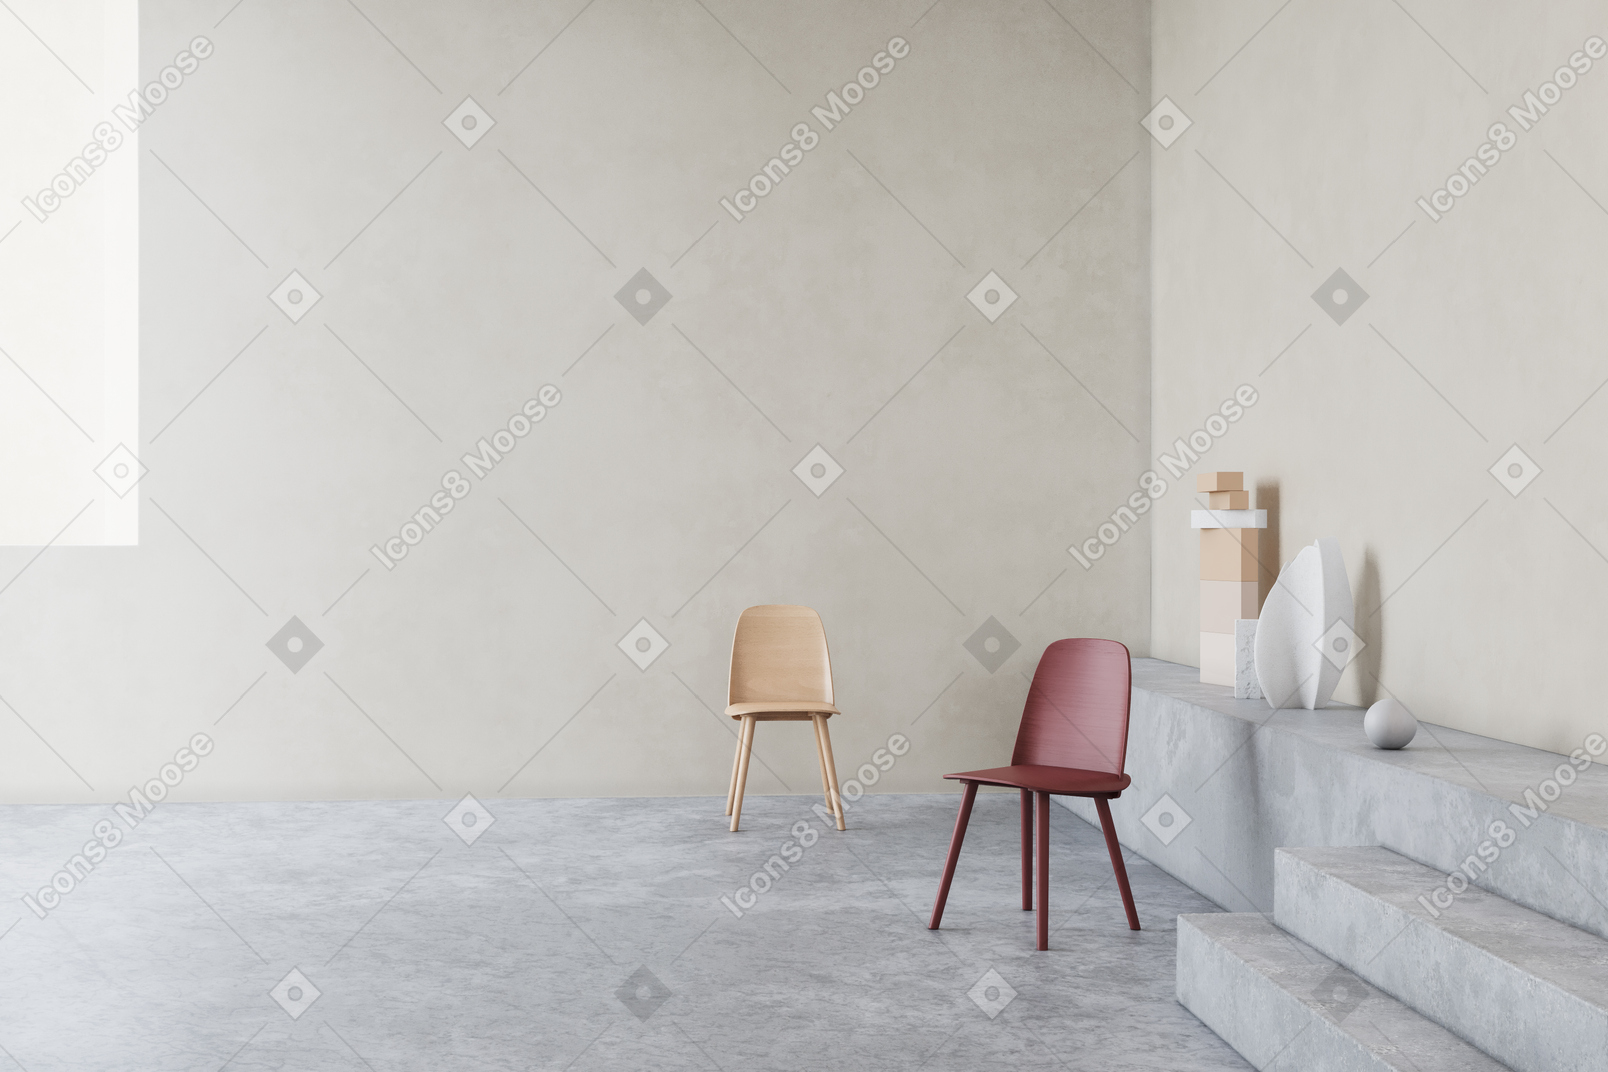 Room with beige walls, chairs and decor items